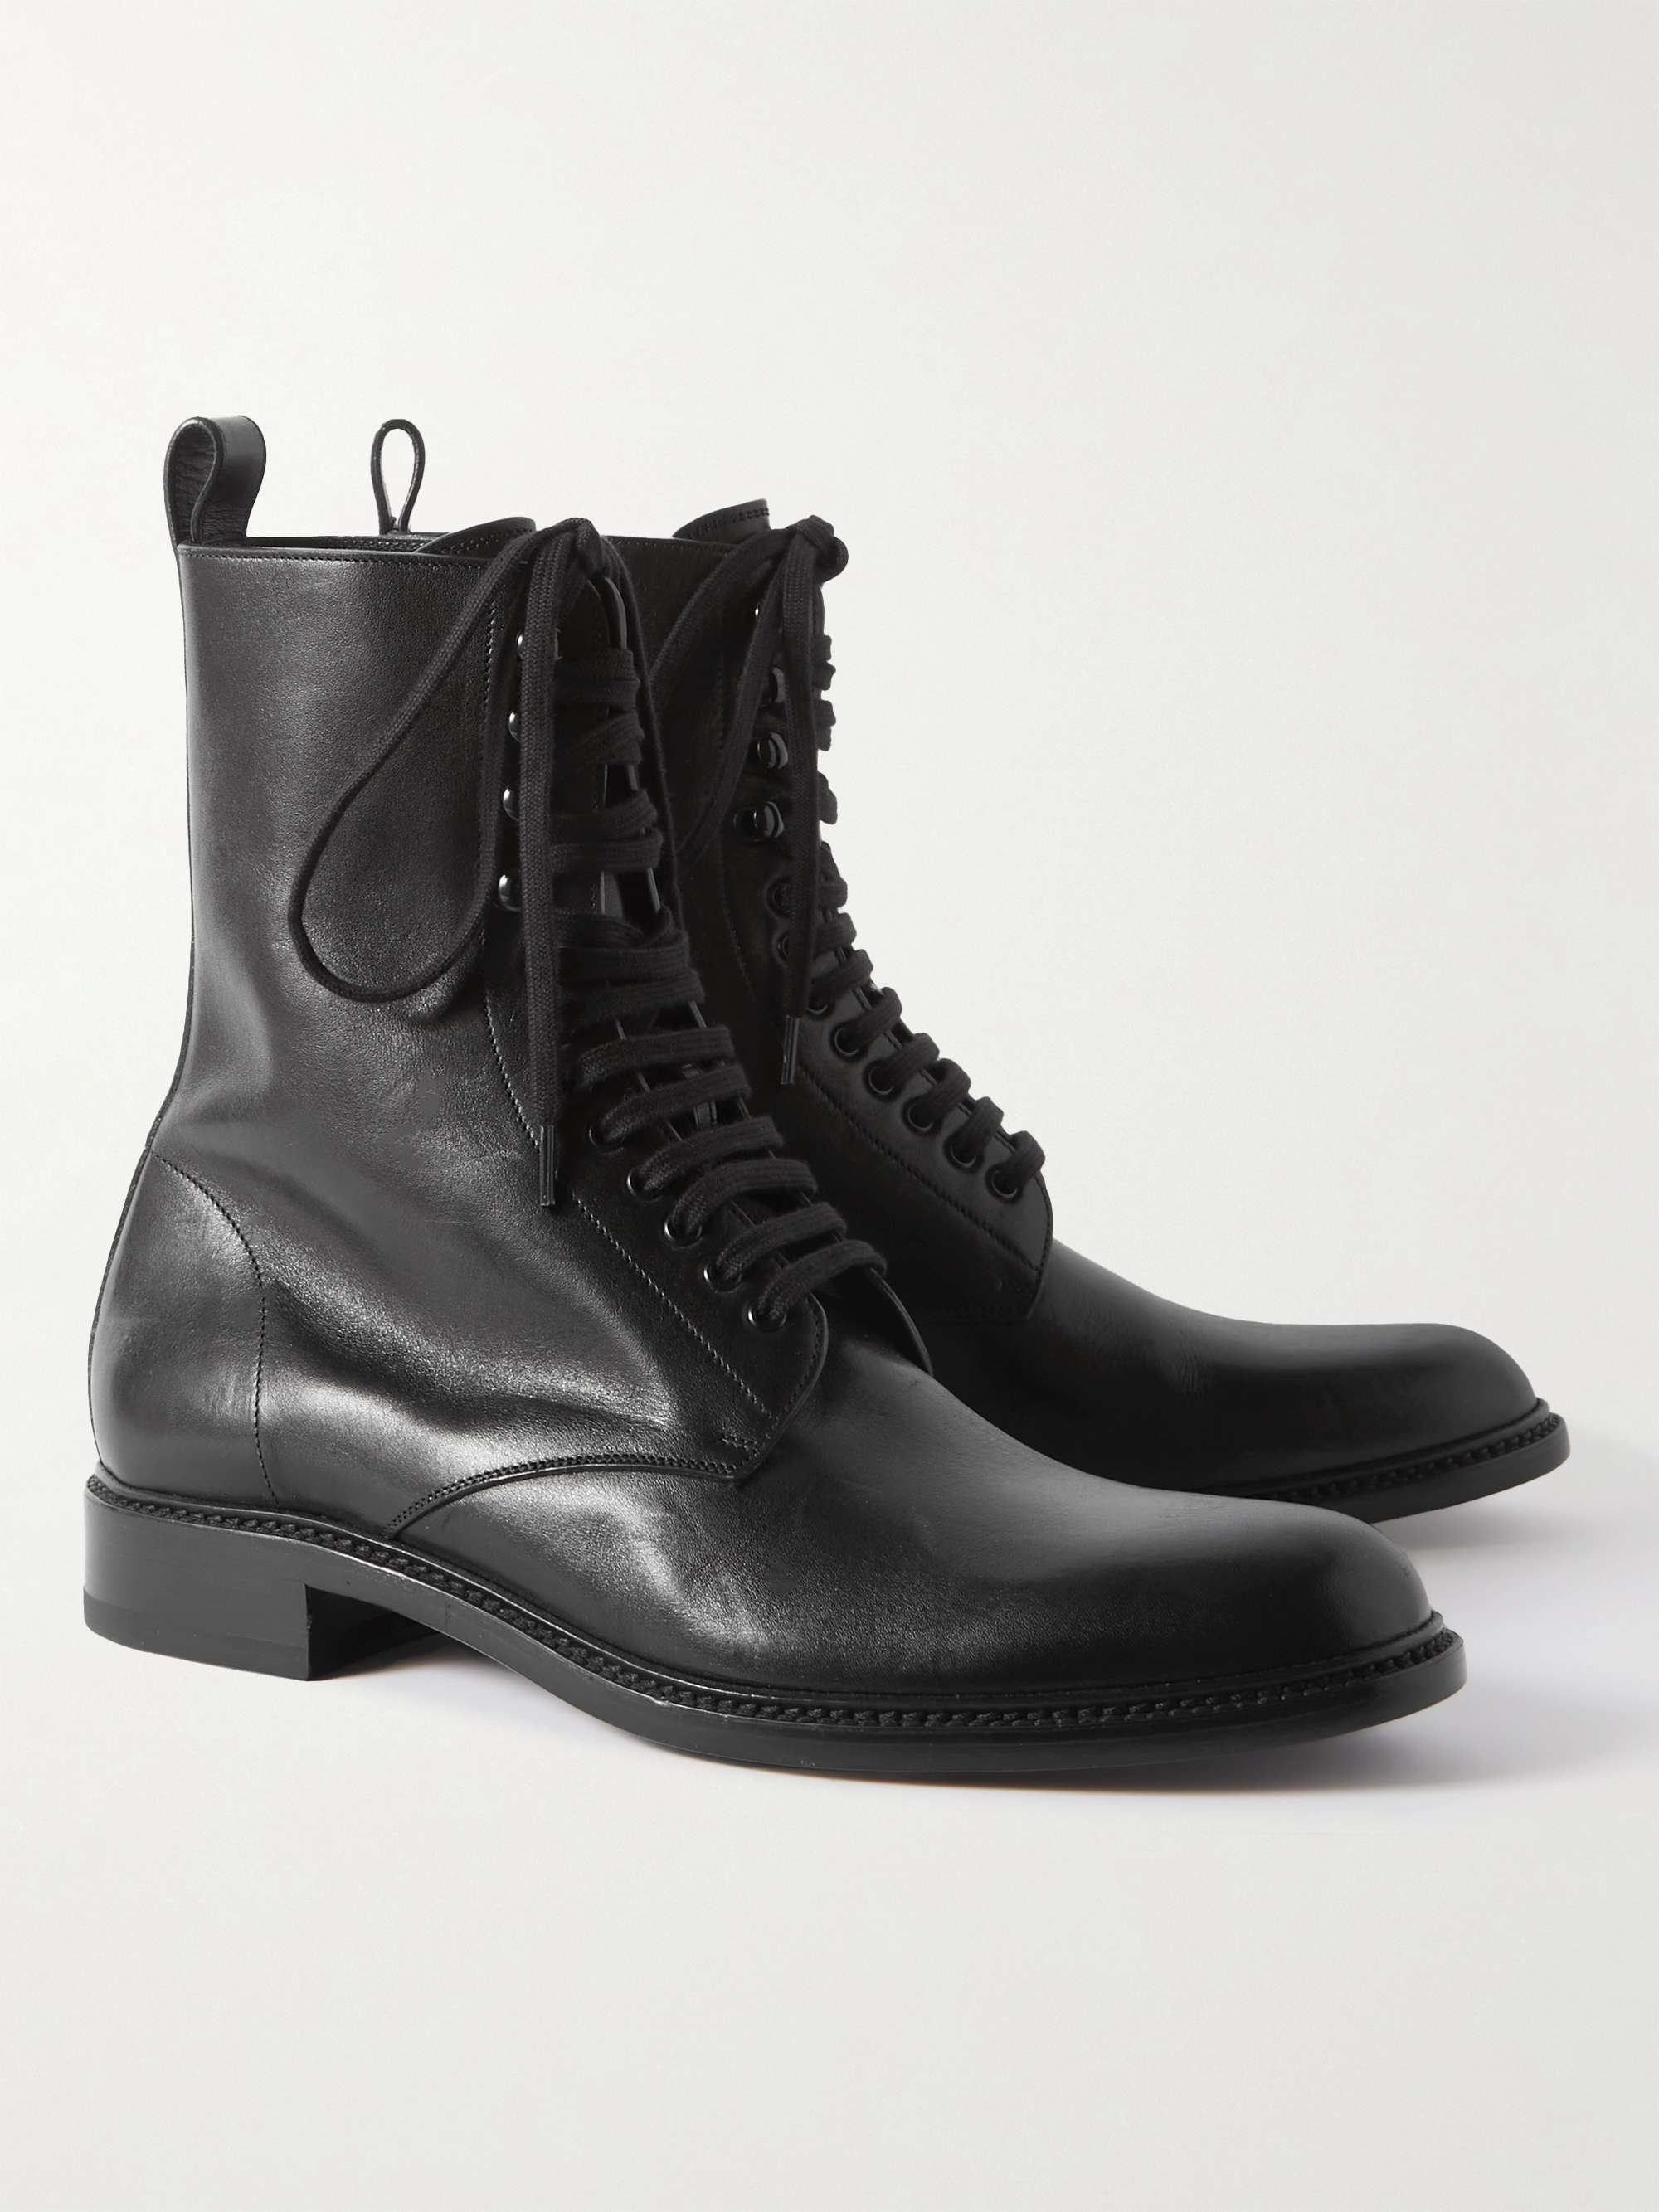 SAINT LAURENT Army Glossed-Leather Lace-Up Boots for Men | MR PORTER